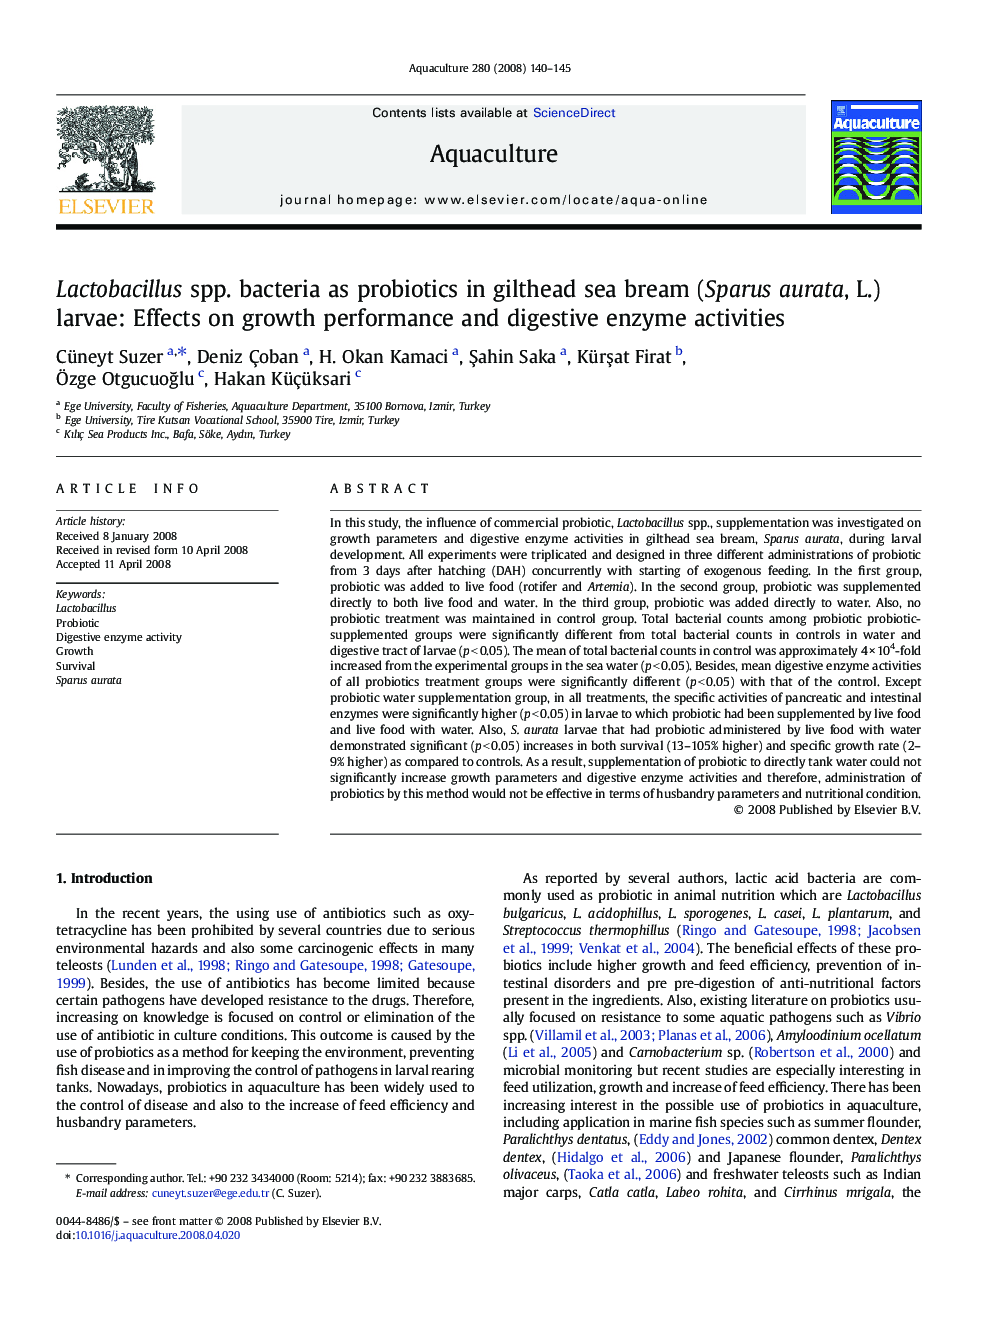 Lactobacillus spp. bacteria as probiotics in gilthead sea bream (Sparus aurata, L.) larvae: Effects on growth performance and digestive enzyme activities